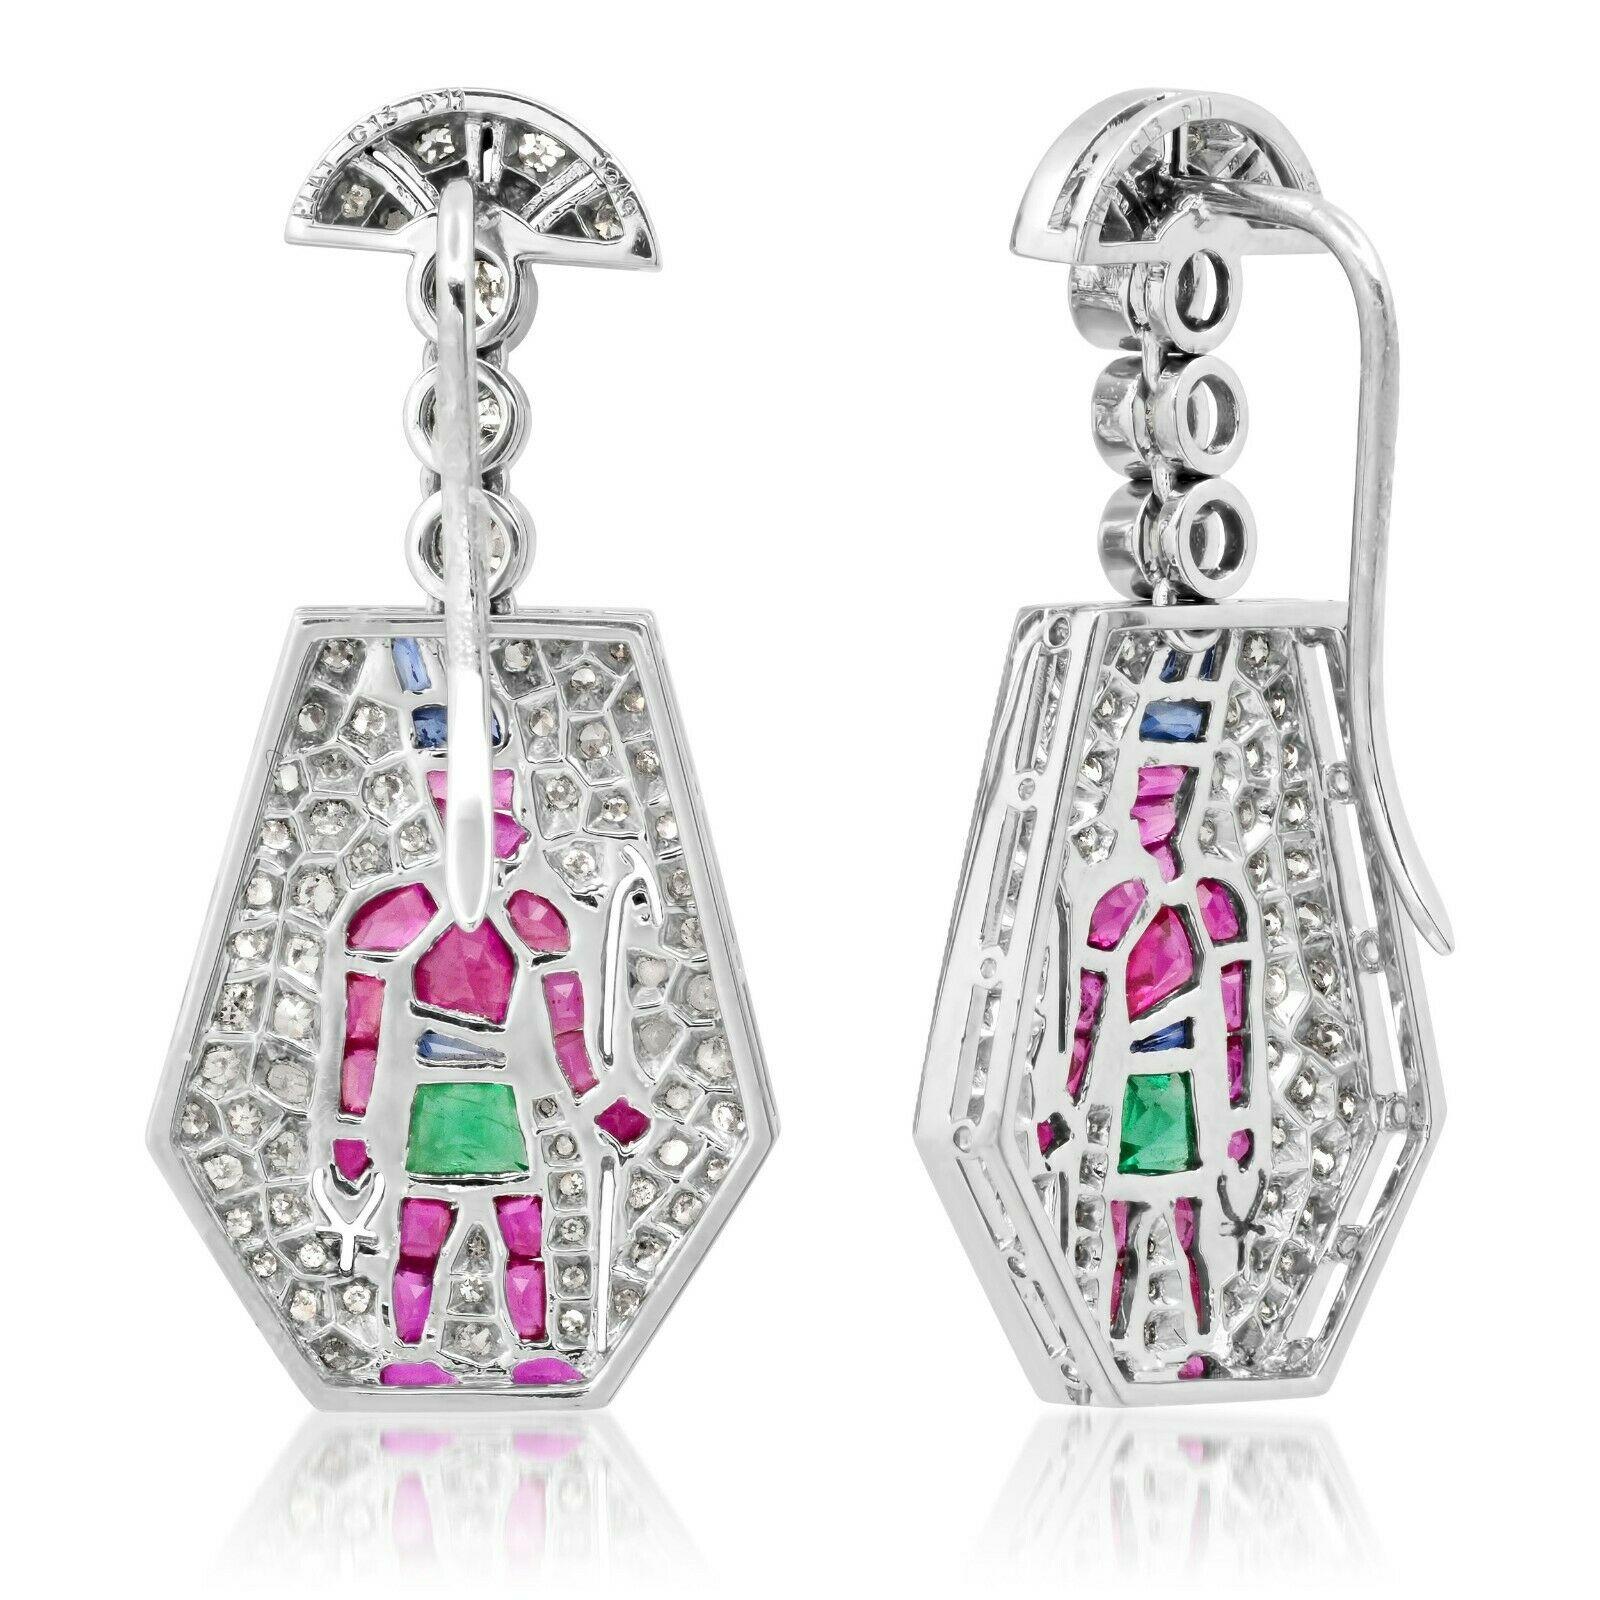 Diamond (1.43 total carat weight) with emerald, ruby, and sapphire (1.38 total carat weight) Egyptian ankh drop/dangle earrings in 900 platinum. The earrings are designed and handmade locally in Los Angeles by Sage Designs L.A. using earth-mined and